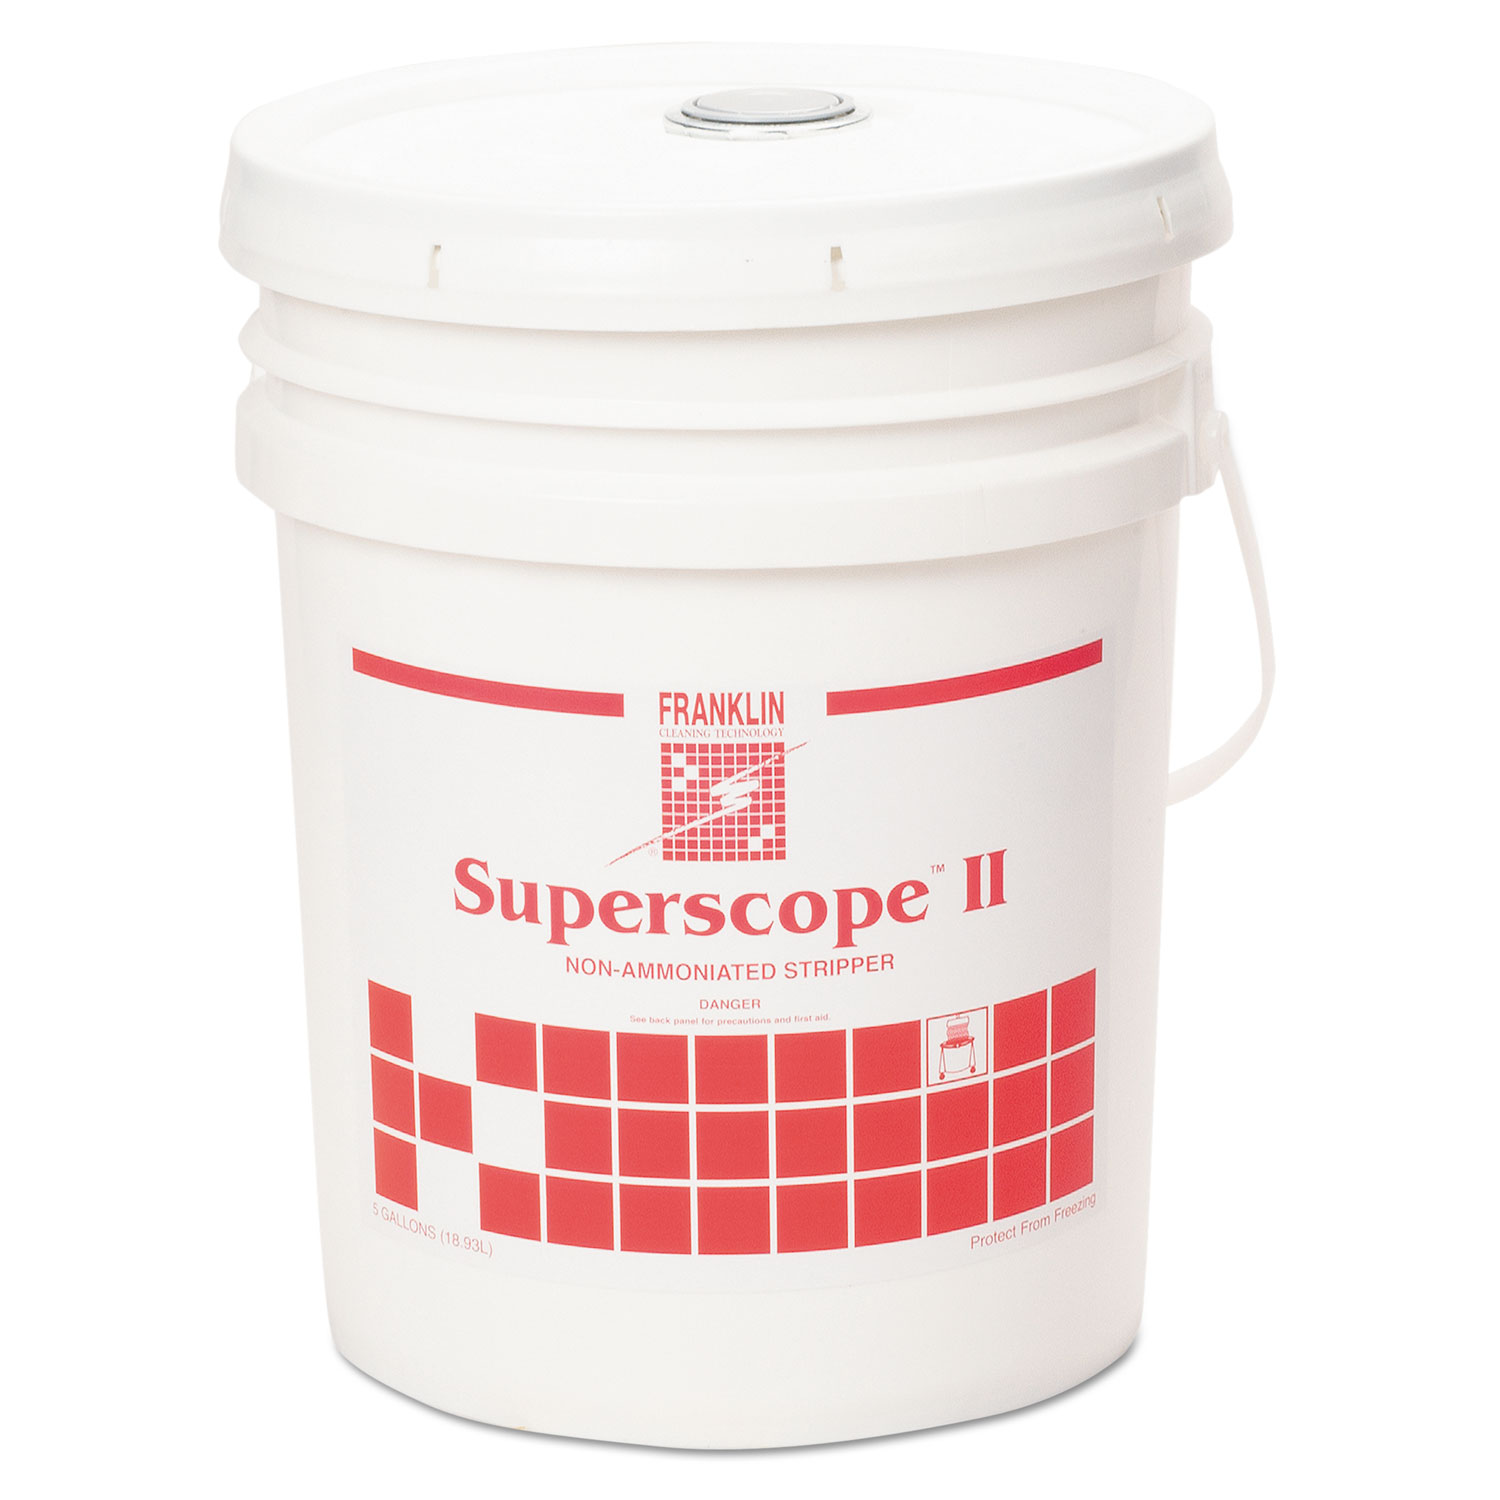  Franklin Cleaning Technology F209026 Superscope II Non-Ammoniated Floor Stripper, Liquid, 5 gal. Pail (FKLF209026) 